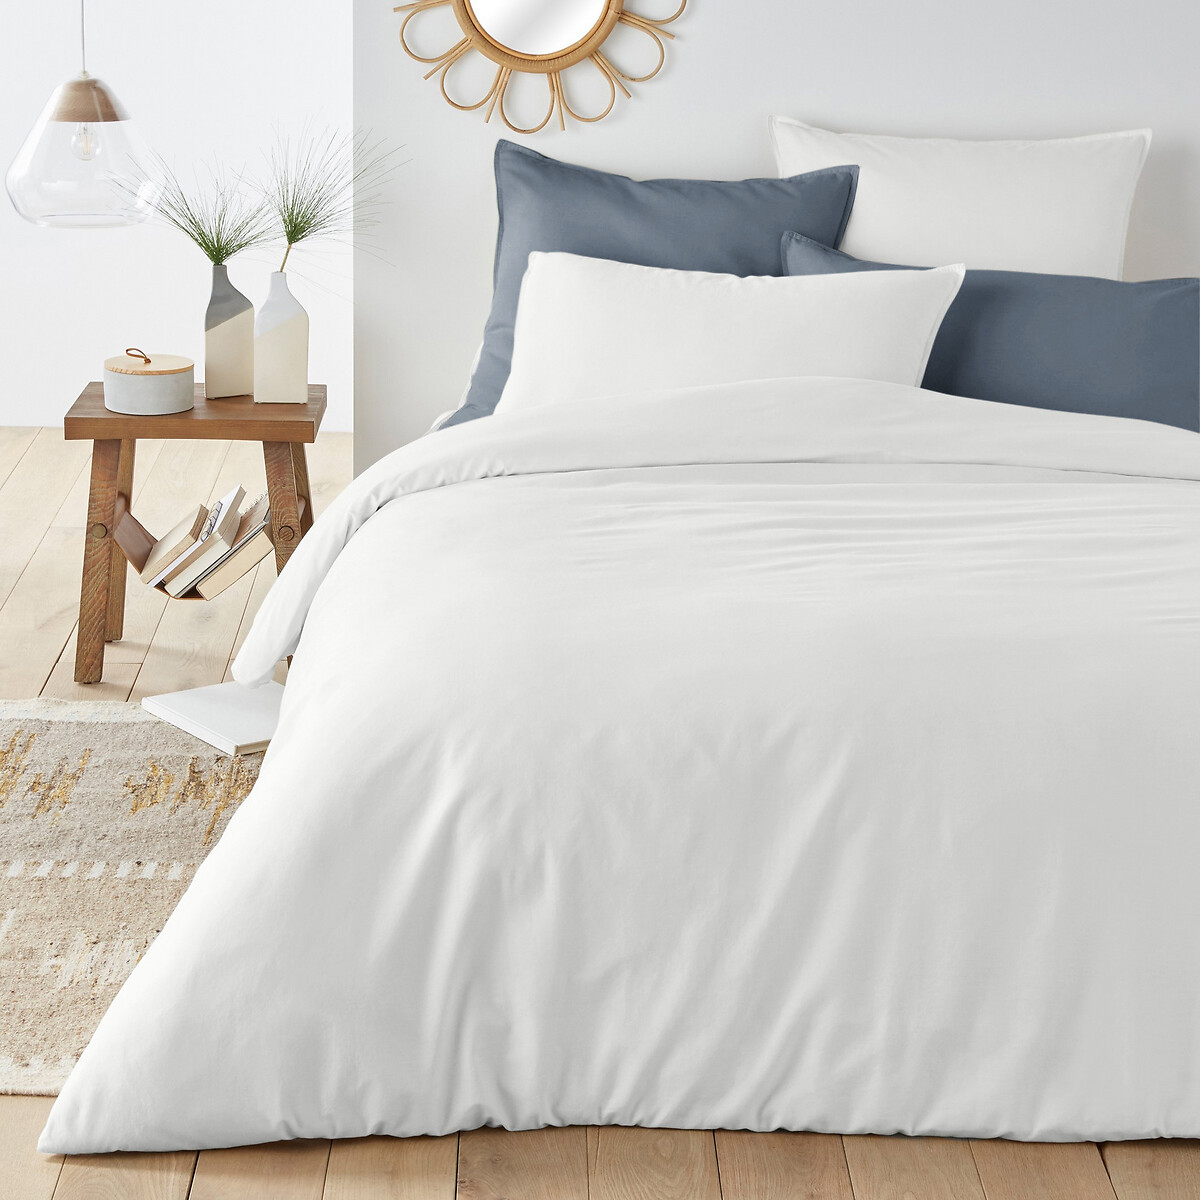 Washed Cotton Duvet Cover La Redoute, Nice White Duvet Cover